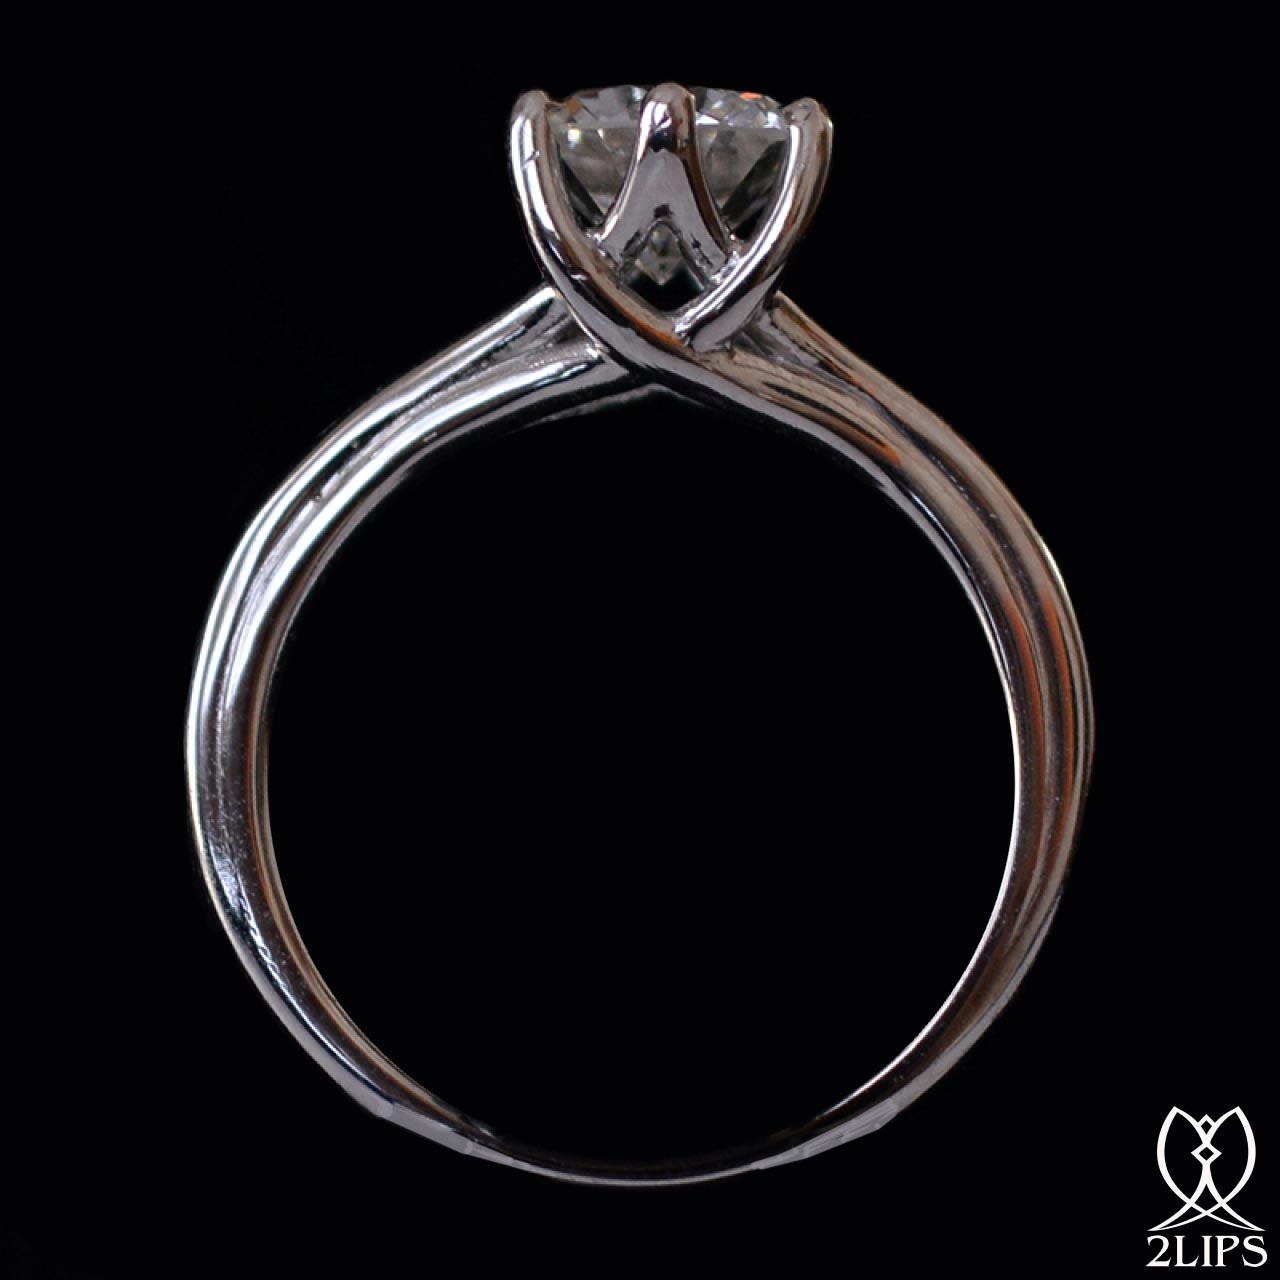 2lips-1-64-ct-top-wesselton-solitair-diamond-engagement-ring